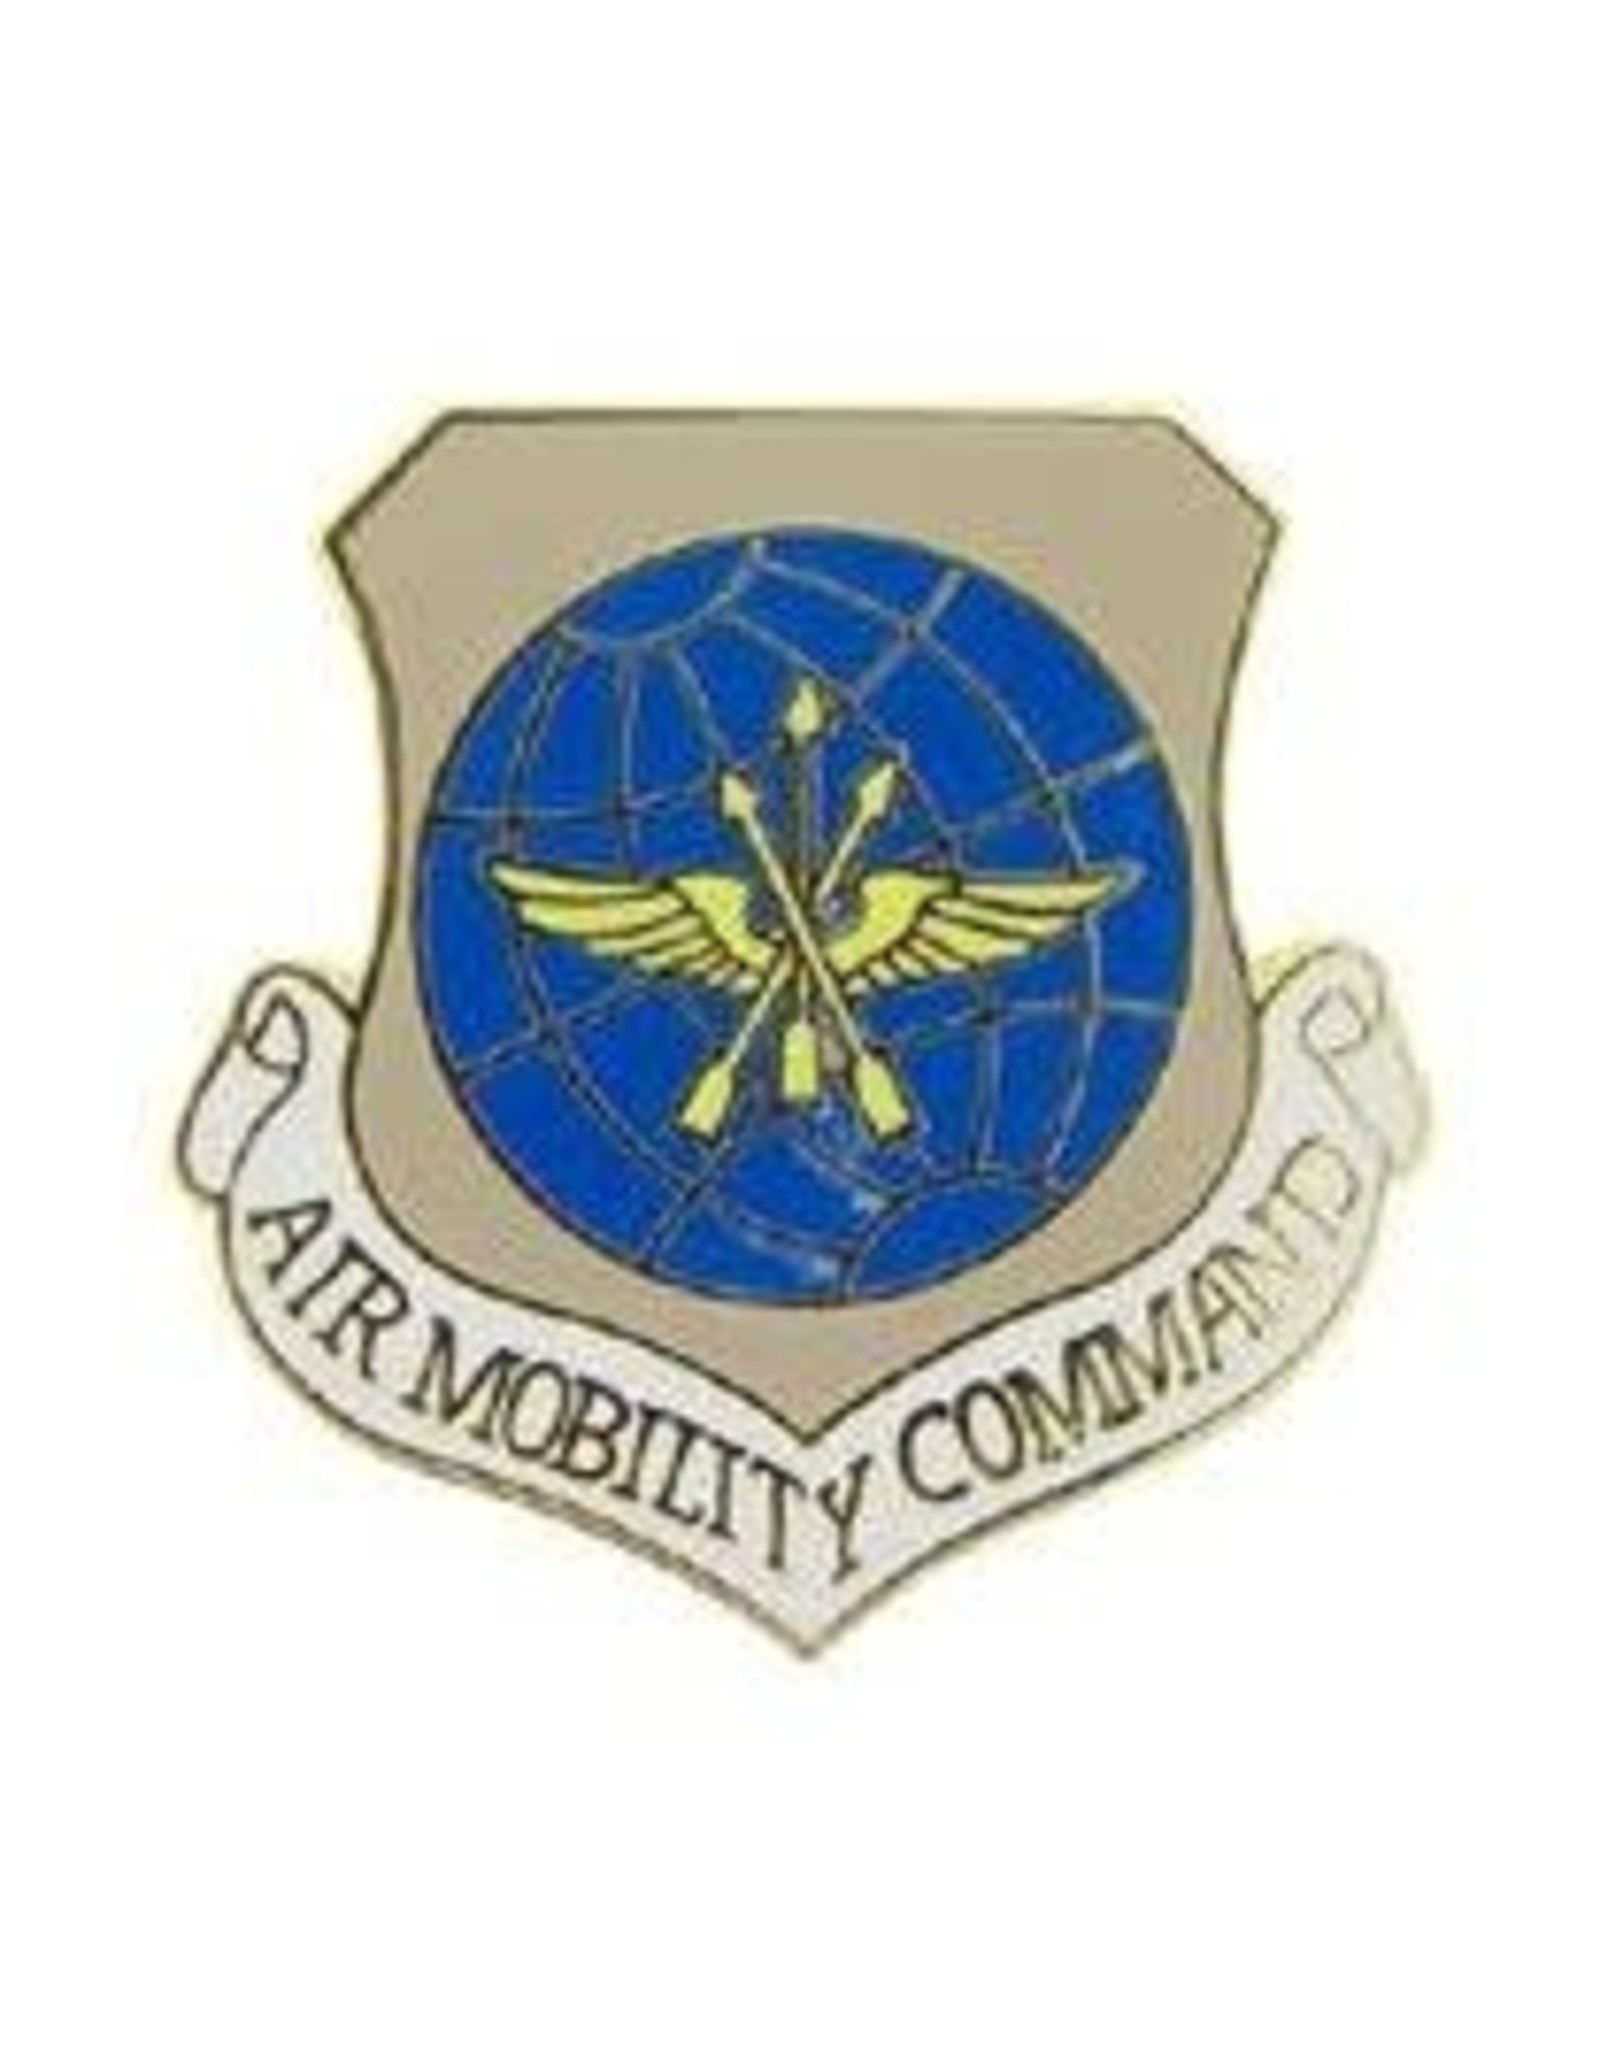 Pin - USAF Mobility Command